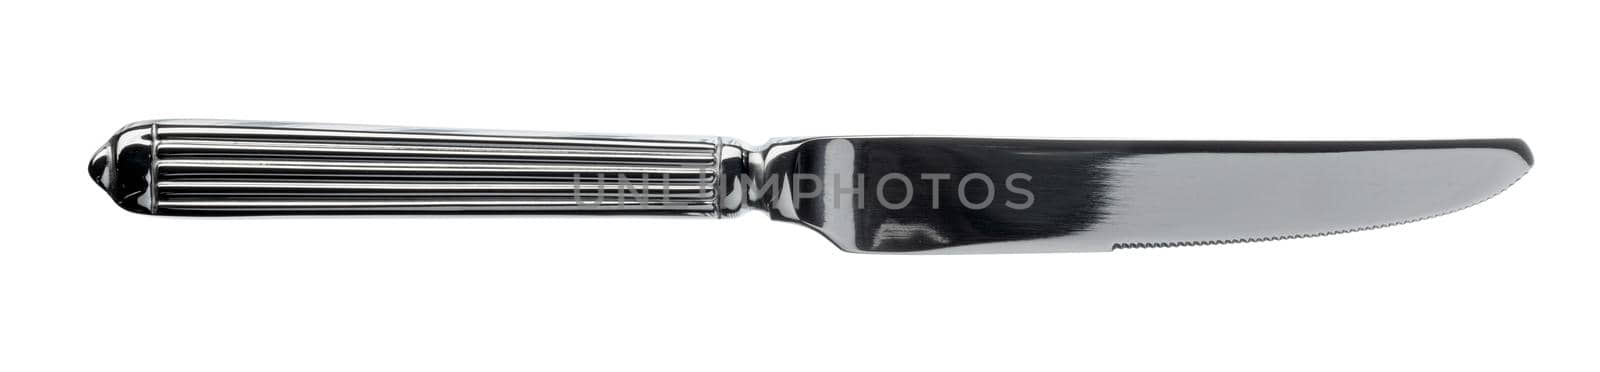 Silver knife cutlery isolated on white background by Fabrikasimf